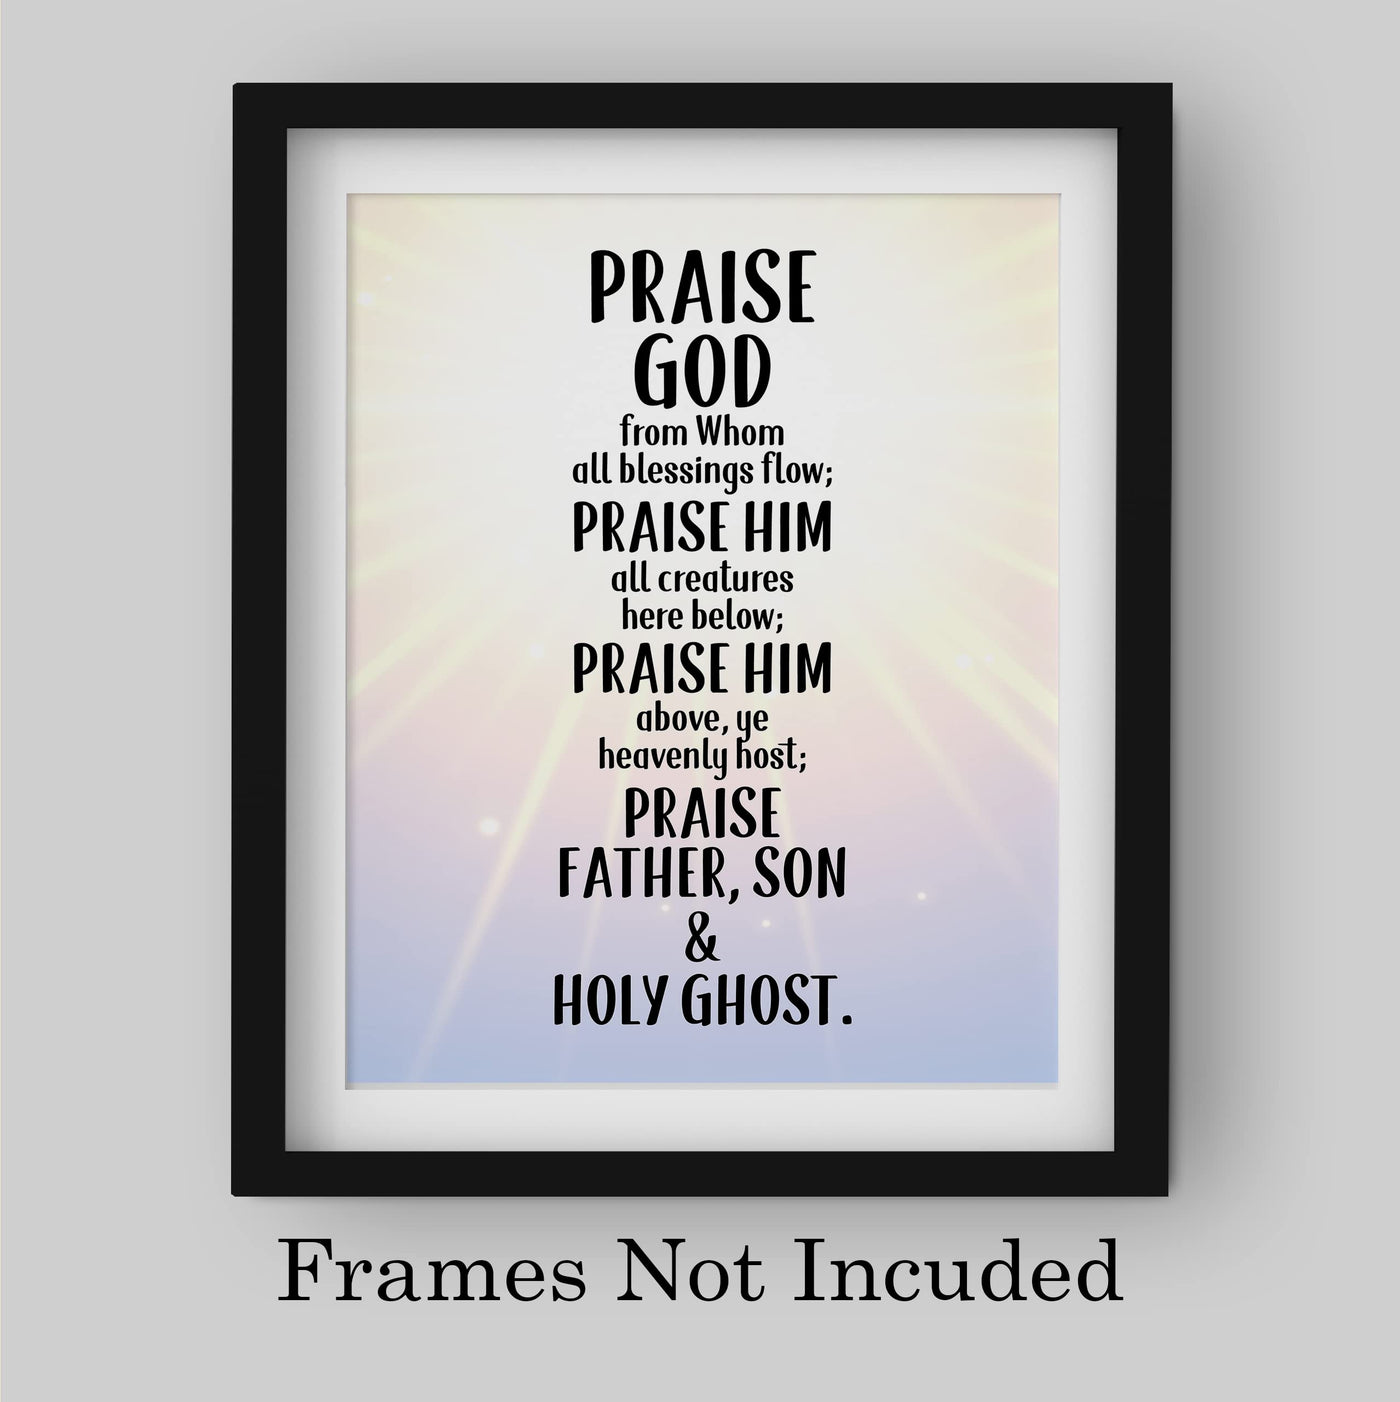 Praise God From Whom All Blessings Flow Christian Hymn Music Wall Art -8 x10" Inspirational Scripture Song Print -Ready to Frame. Classic Hymnal Decoration for Home-Office-Church & Religious Decor!